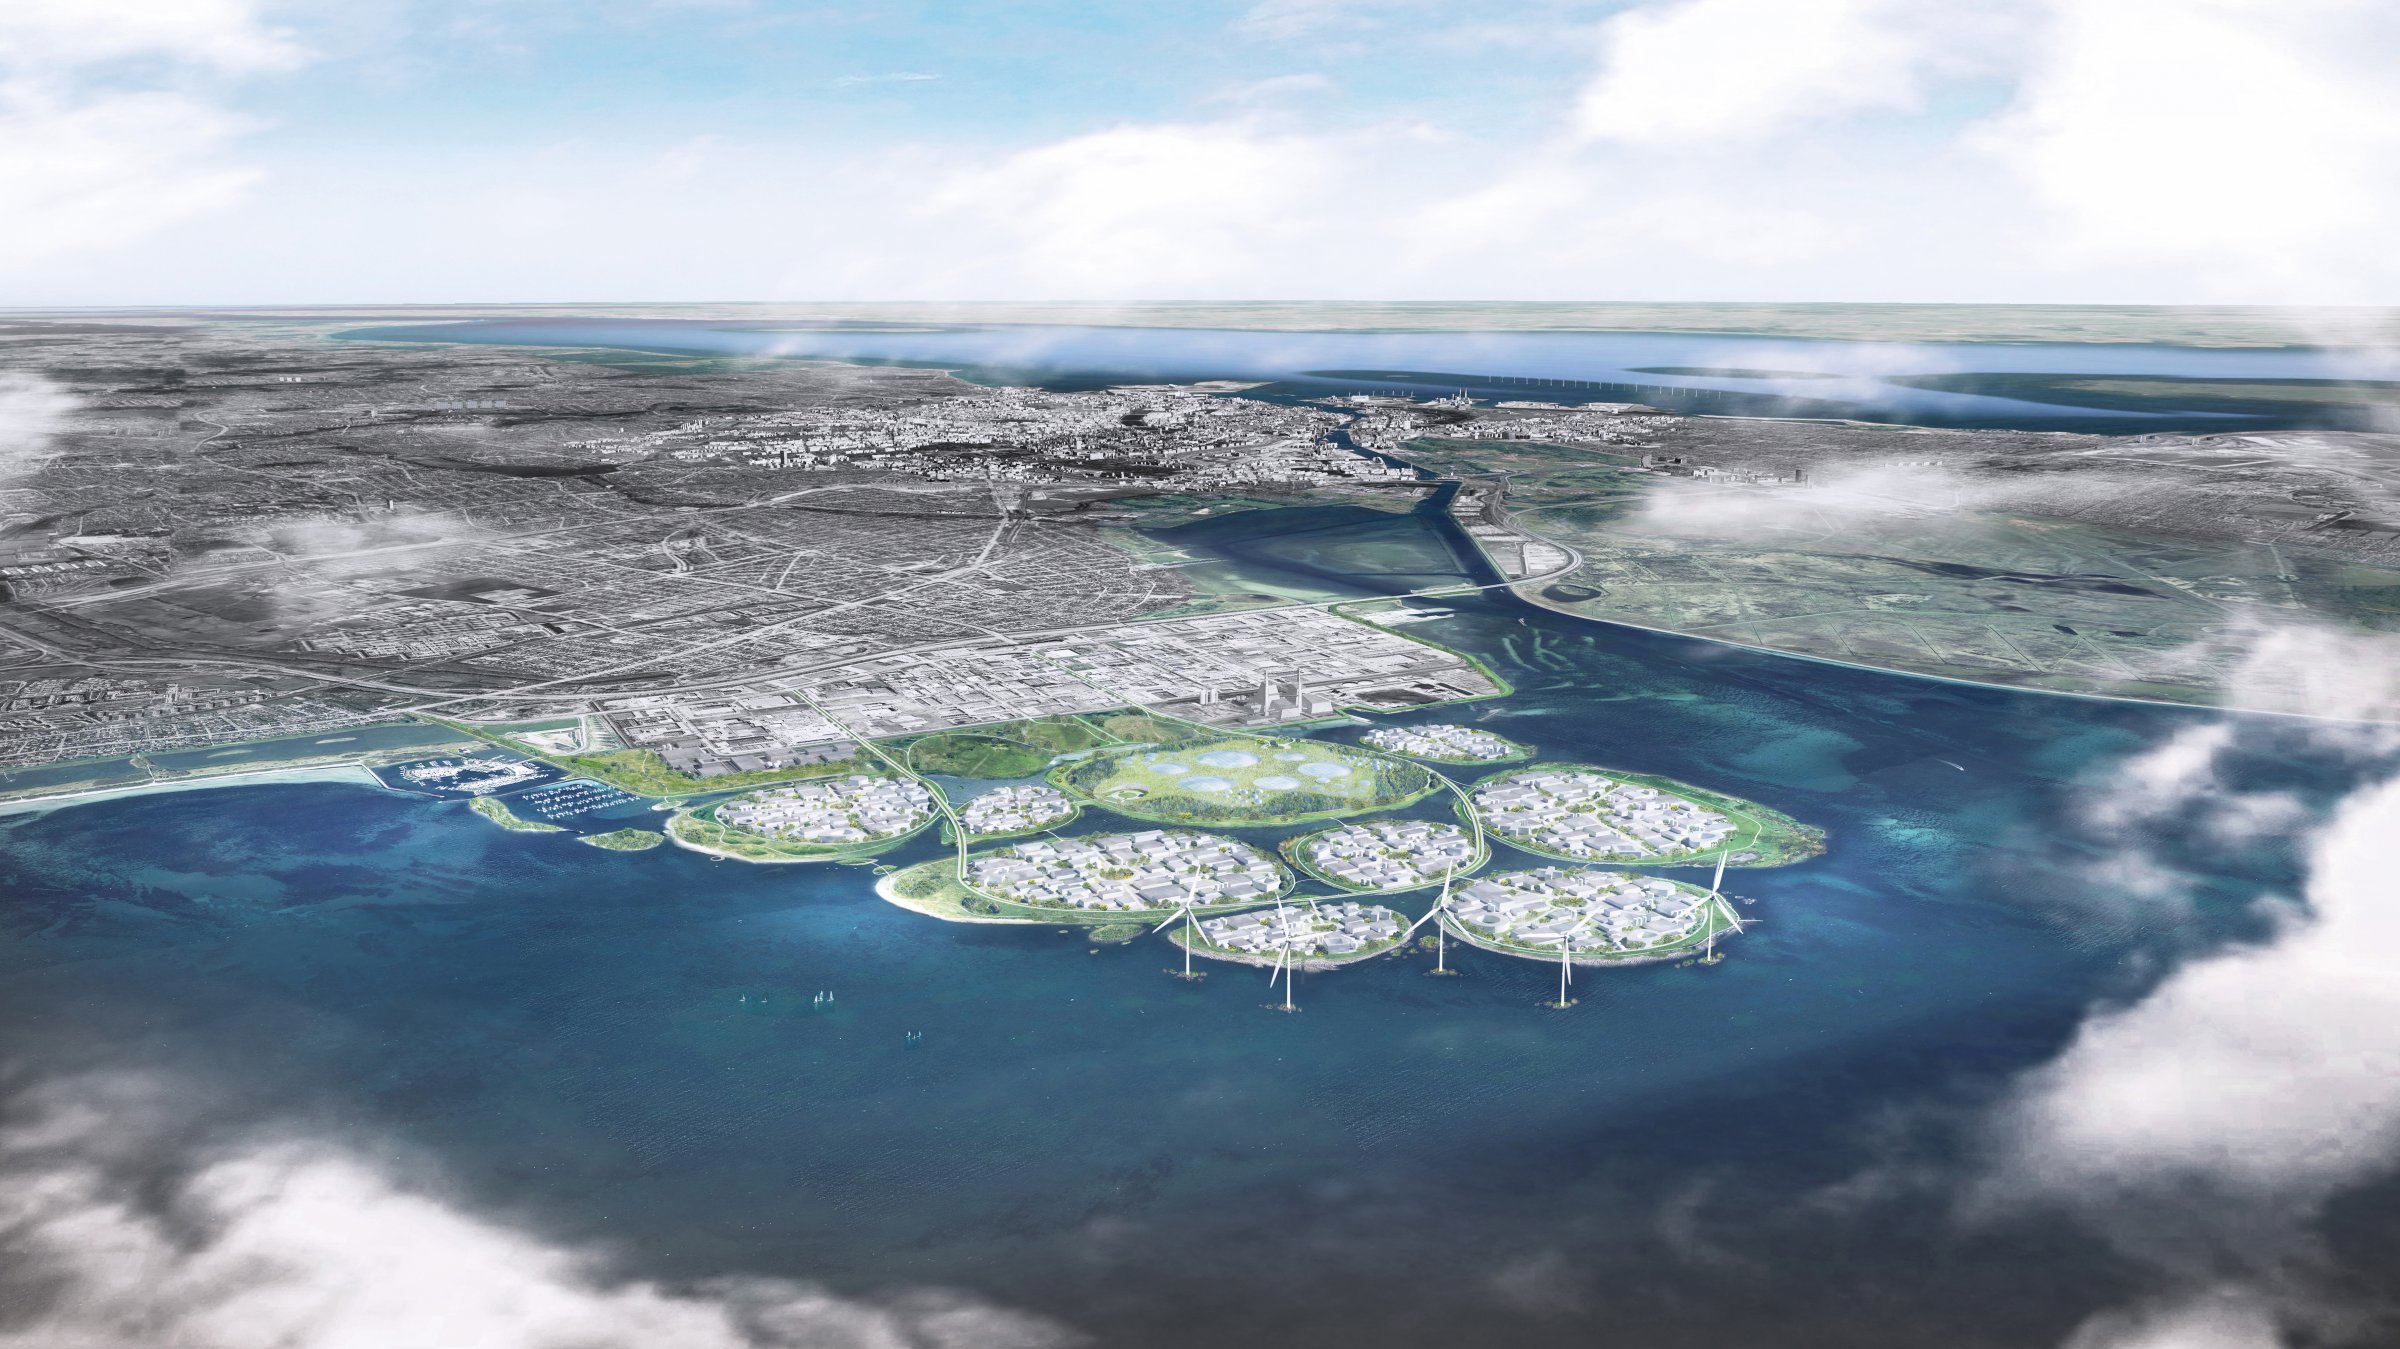 Copenhagen wants to build 9 artificial islands to house the European Silicon Valley. Take a look at the plan picture